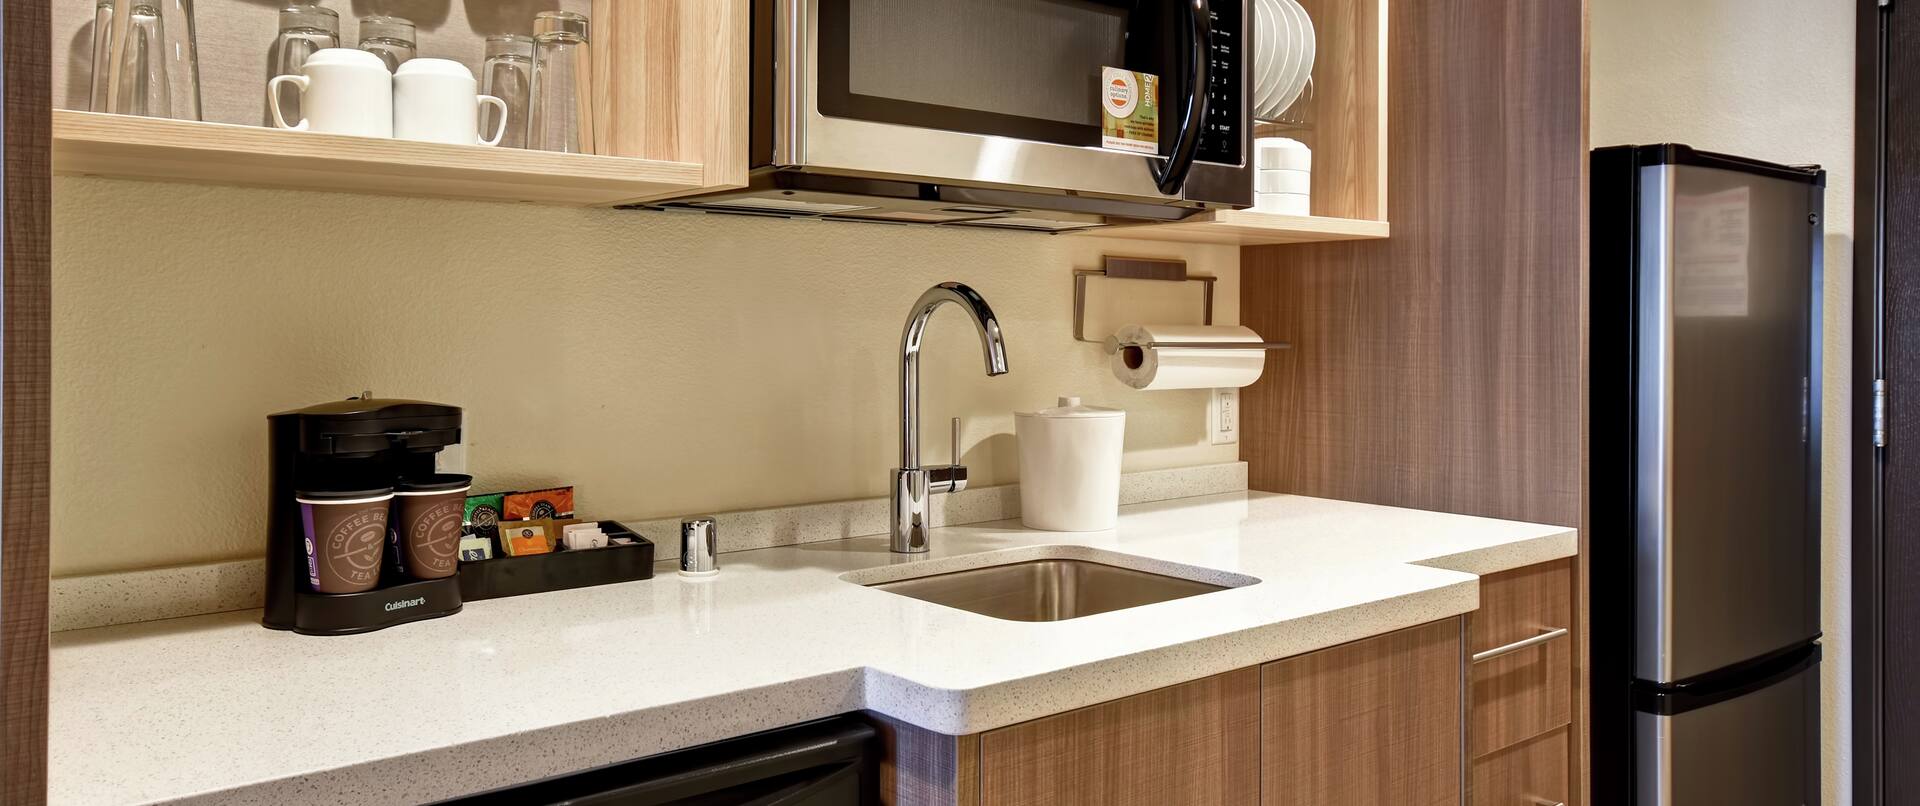 Kitchen Amenities and Appliances